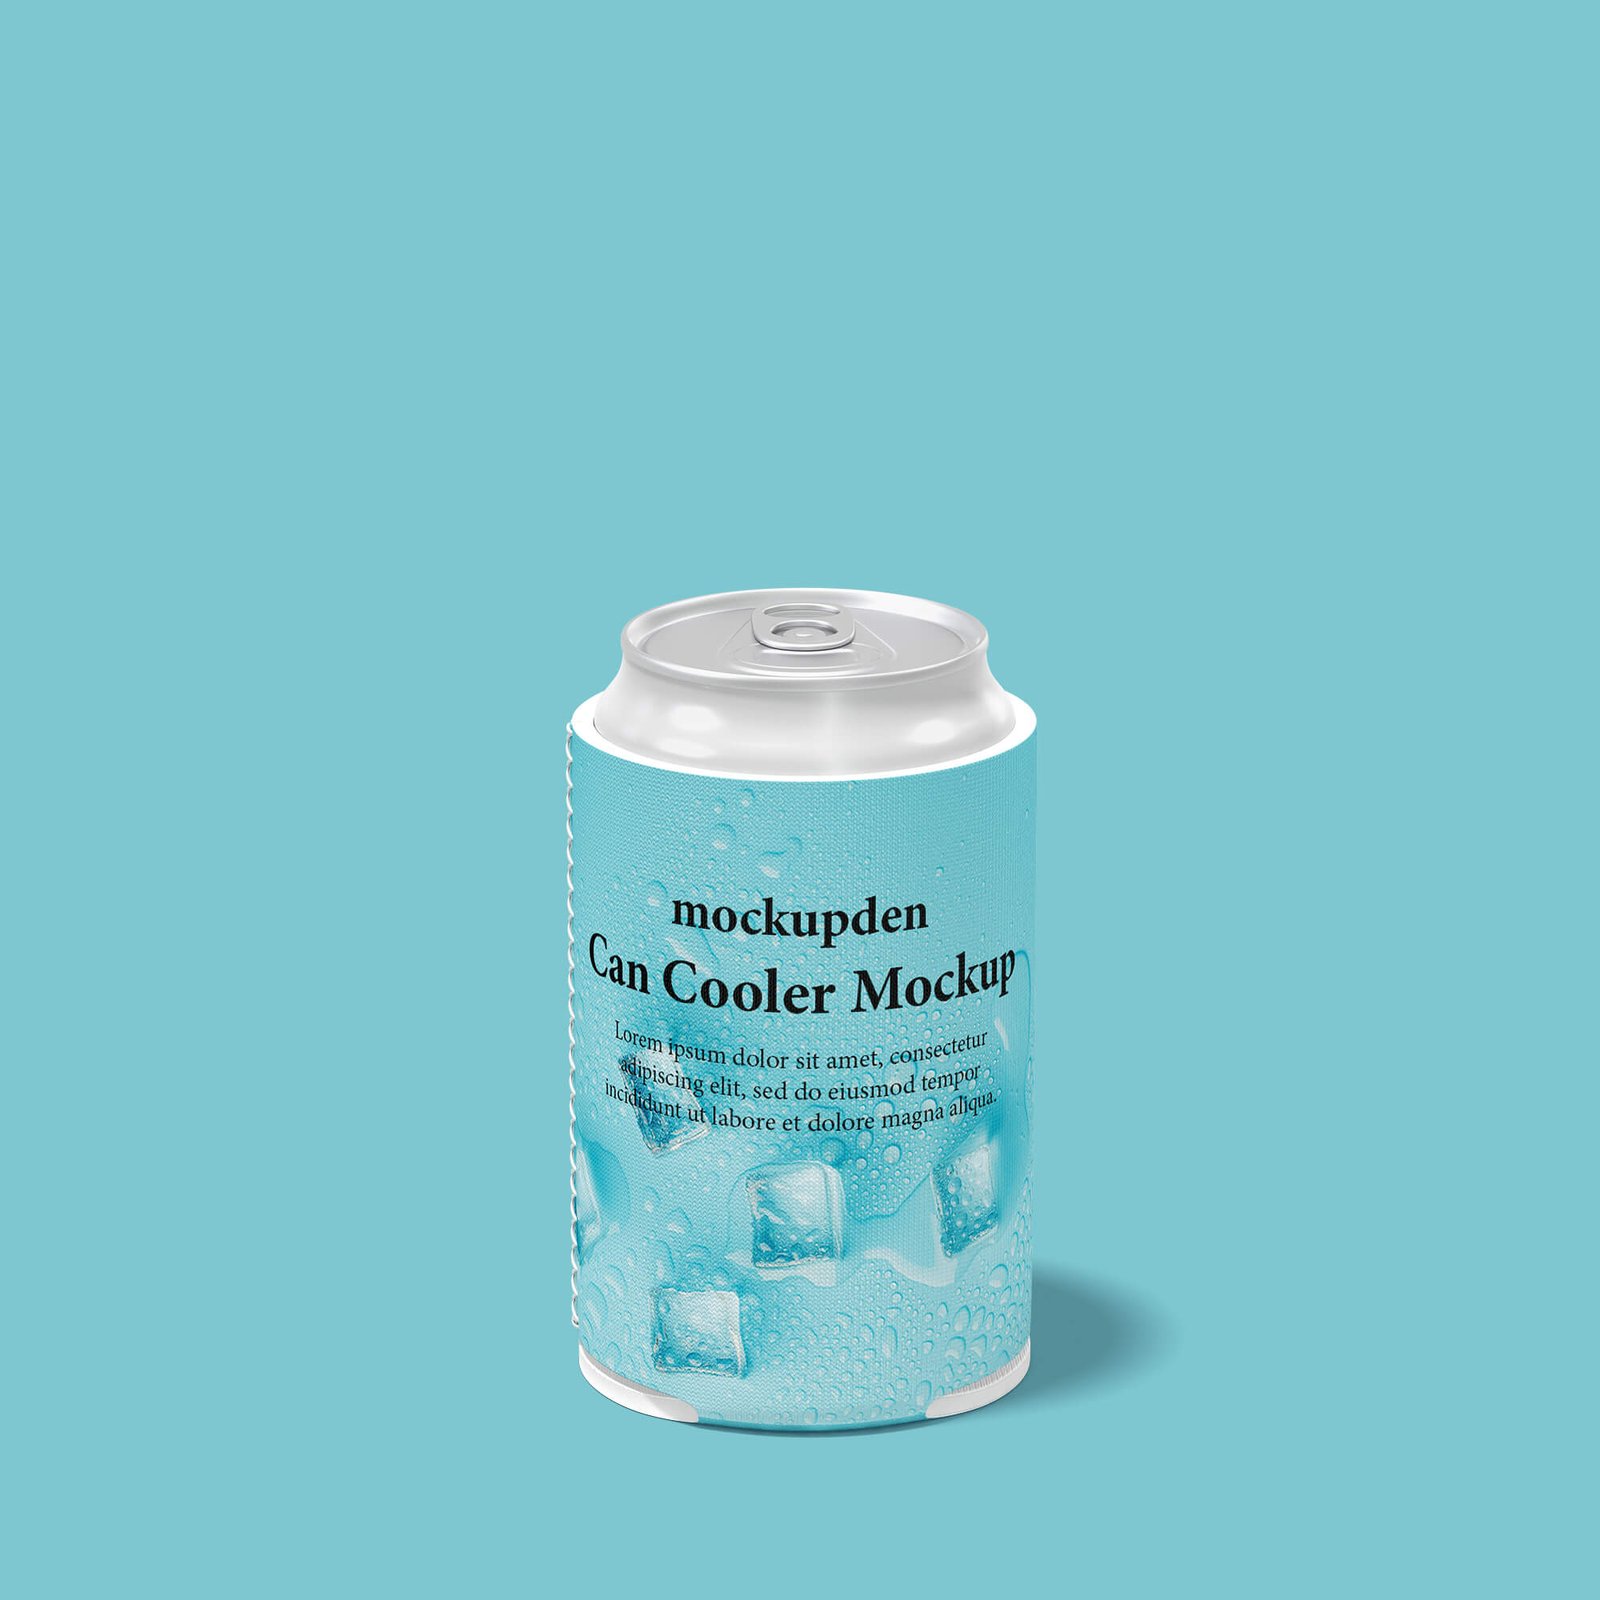 Design Free Can Cooler Mockup PSD Template (1)